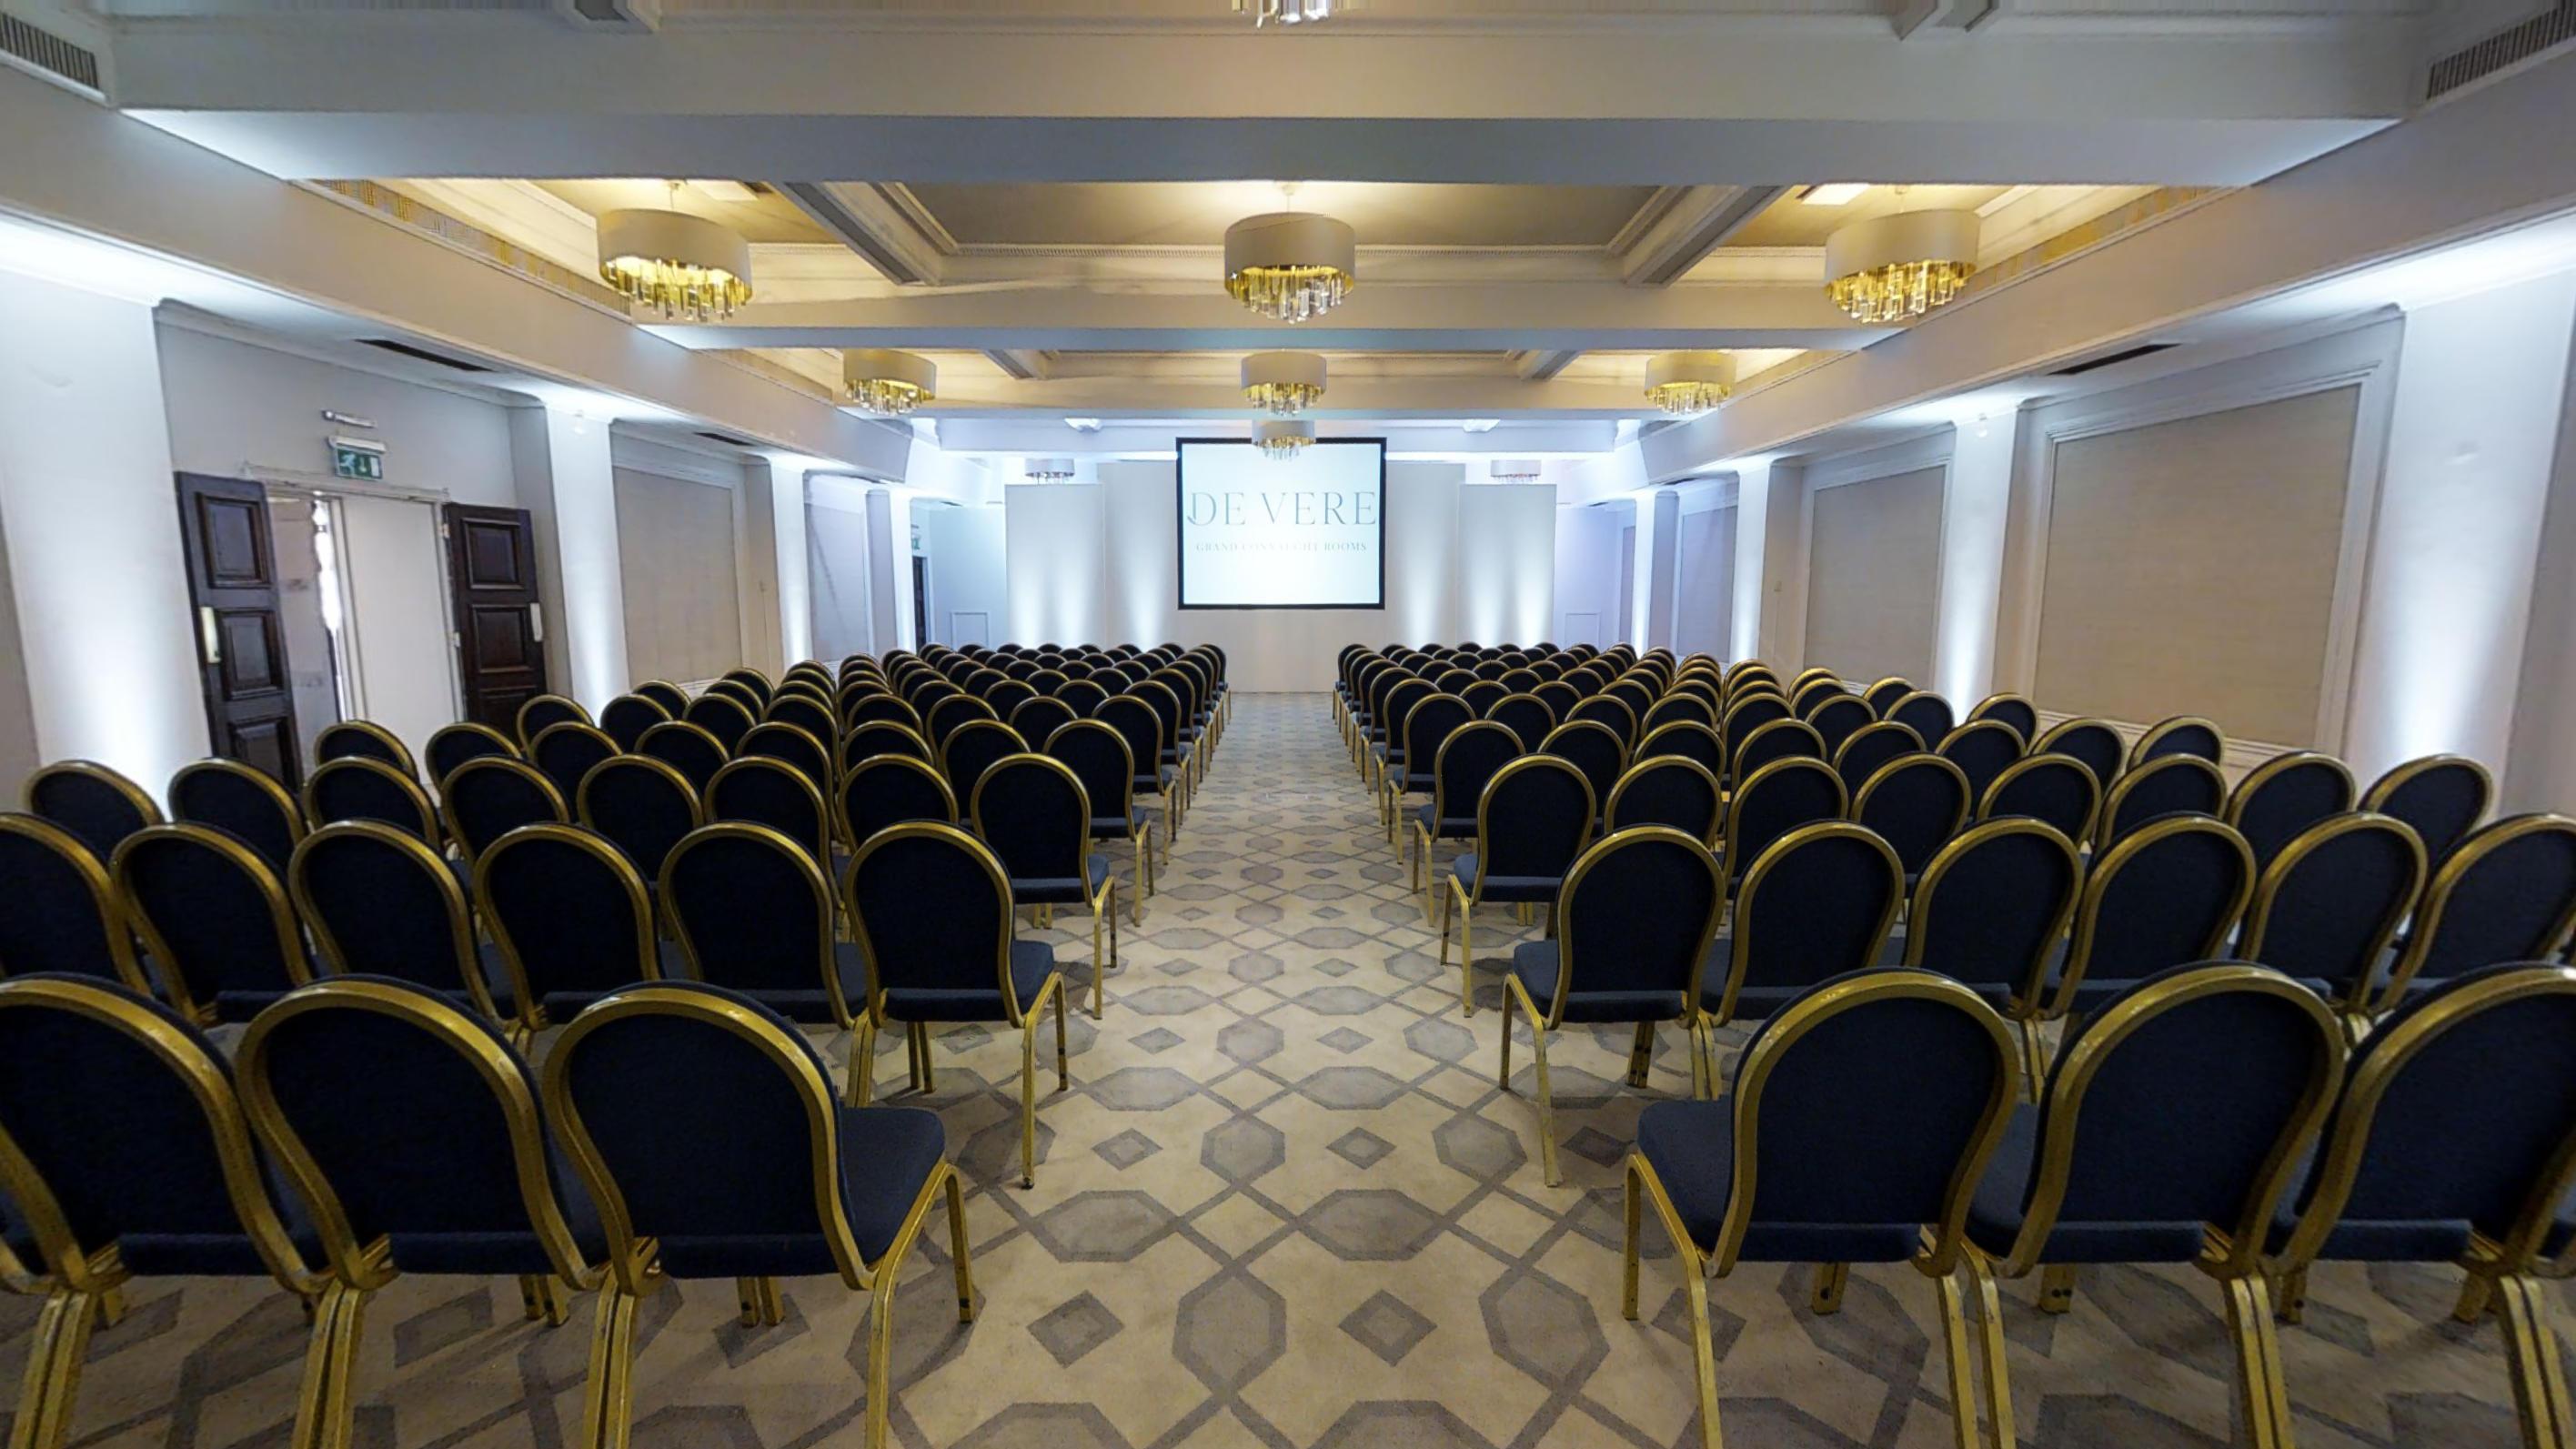 De Vere - Grand Connaught Rooms, Cornwall & Crown photo #3